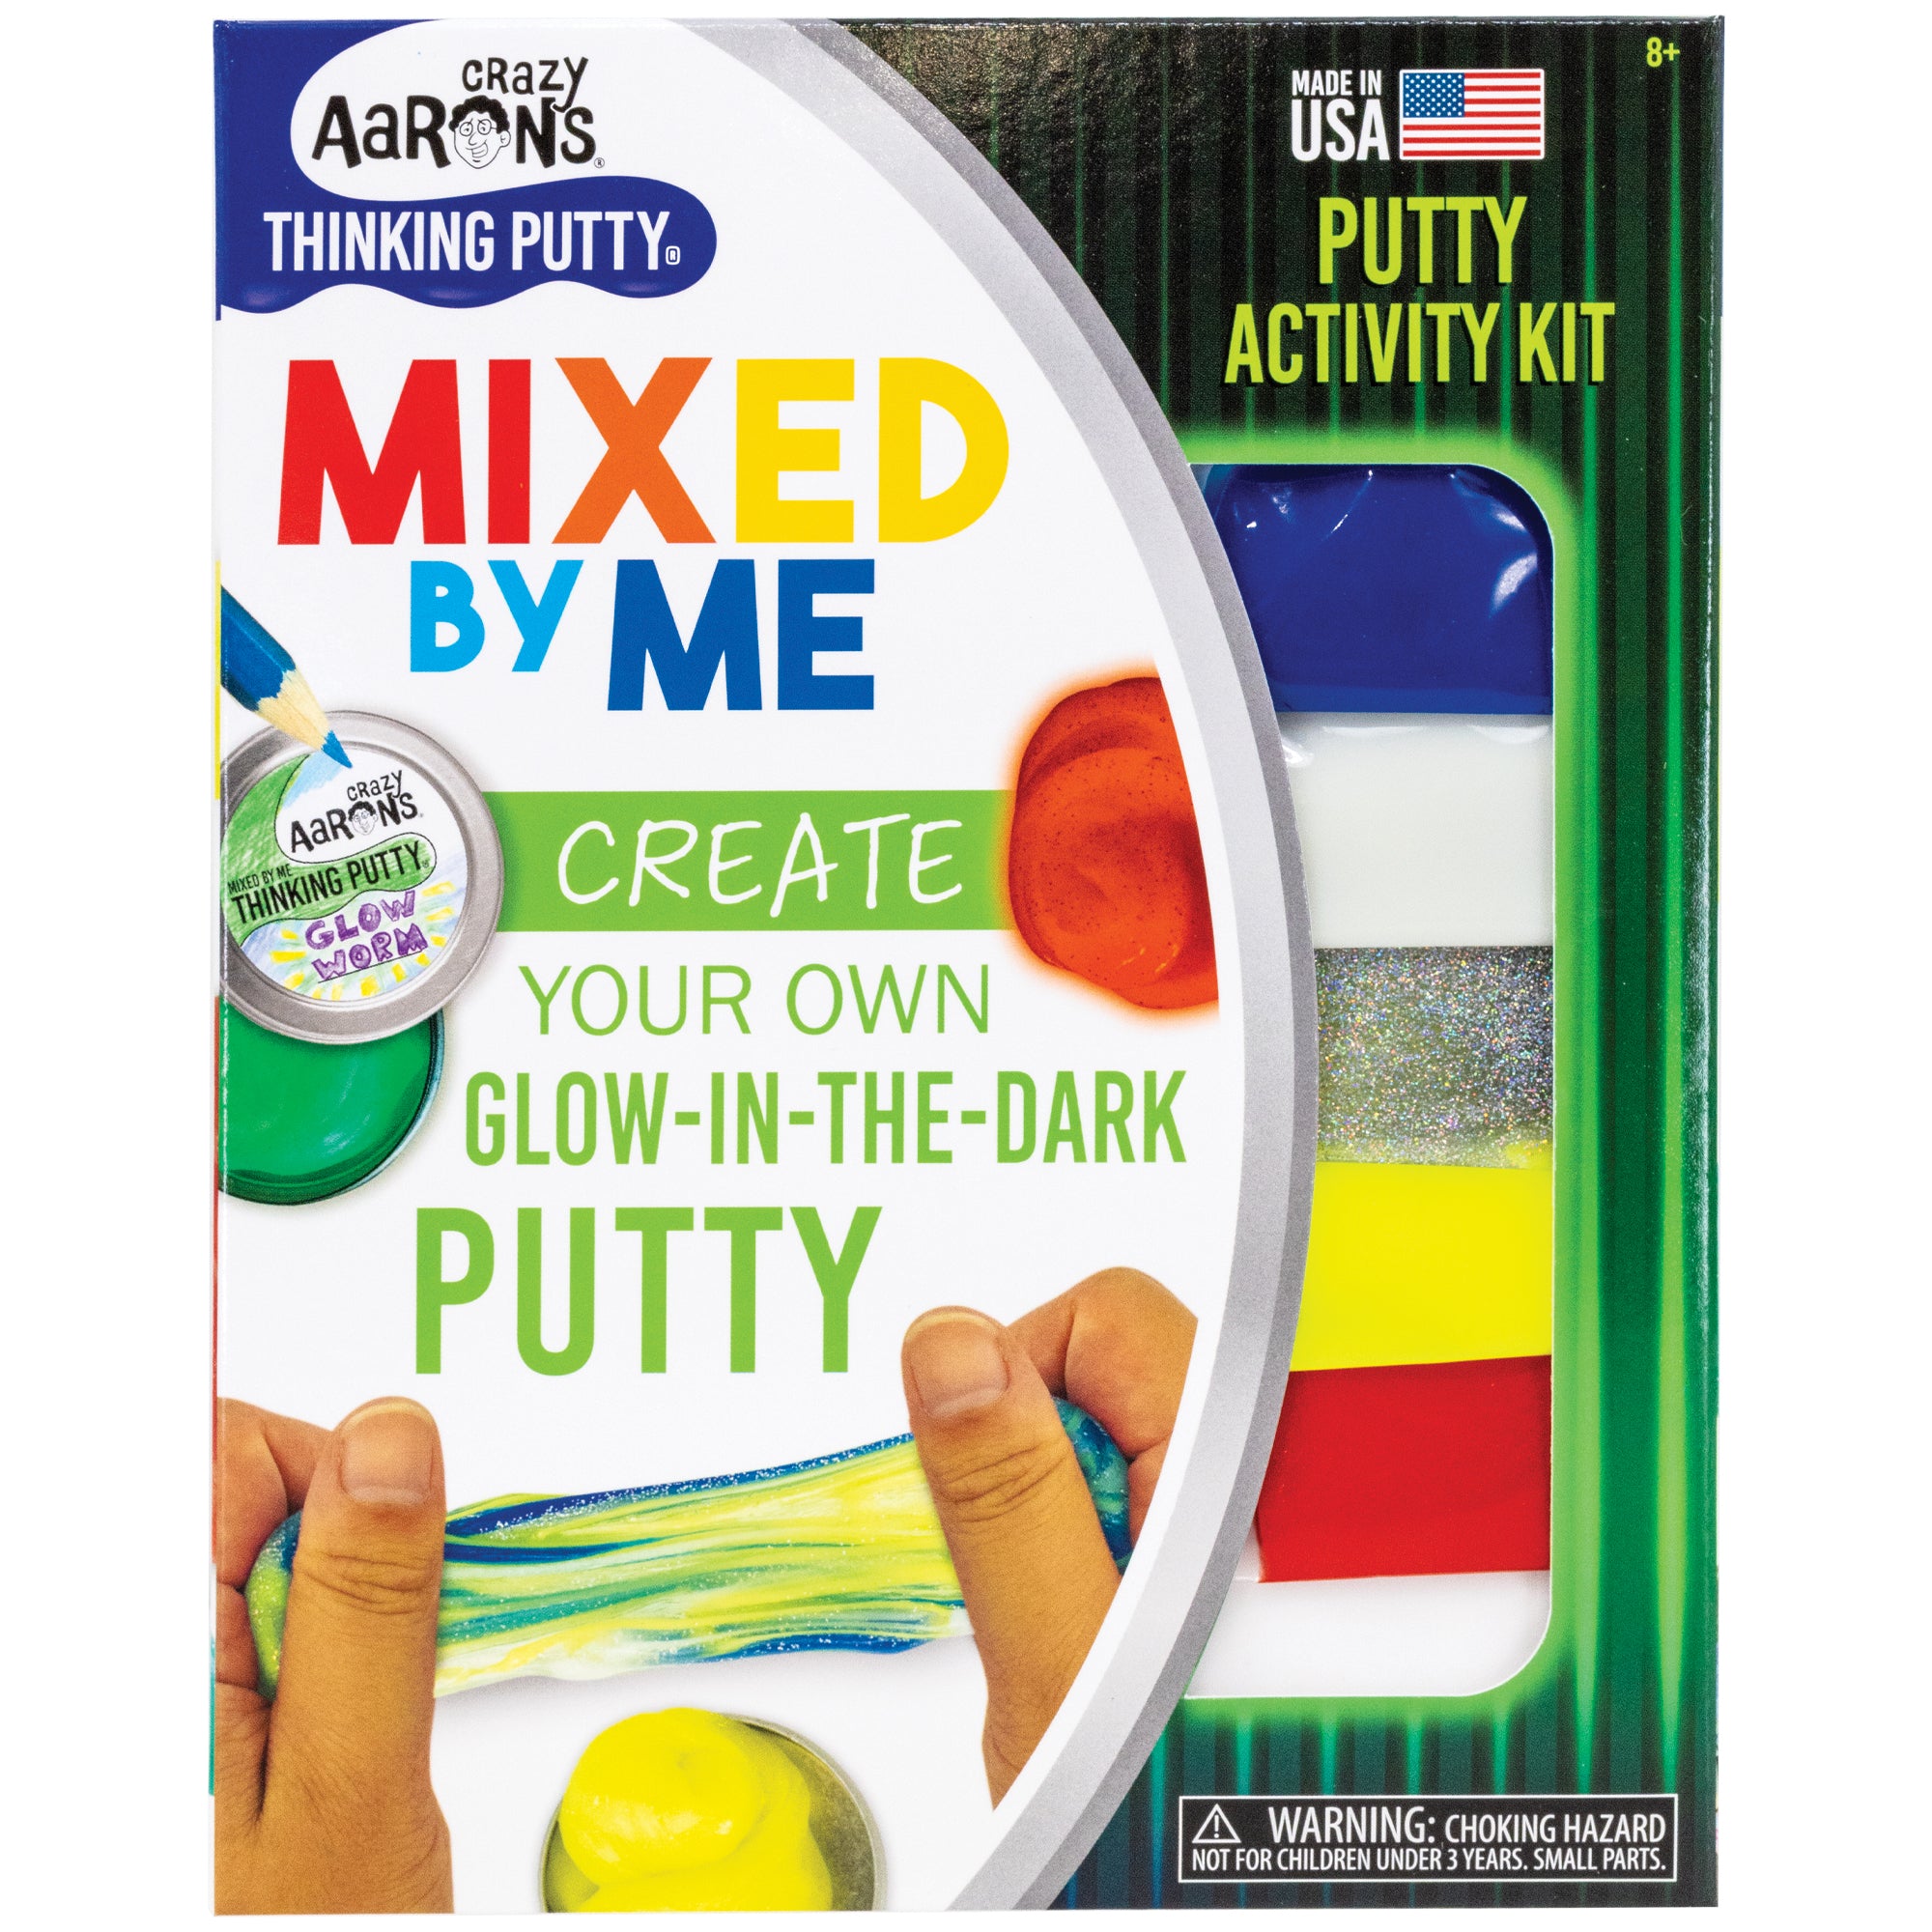 Mixed by Me, Glow, Thinking Putty Kit box cover. The white, black, and green box shows images on the left, including; a green putty in a small tin with a pencil drawing on the lid label, a brick red glob, a yellow glob, and a hand stretching and mixing yellow, blue, and silver glitter together. To the right of the box is a window, showing contents of the kit. The clear, flat, plastic bags contain blue, white, glitter, yellow, and red putty.